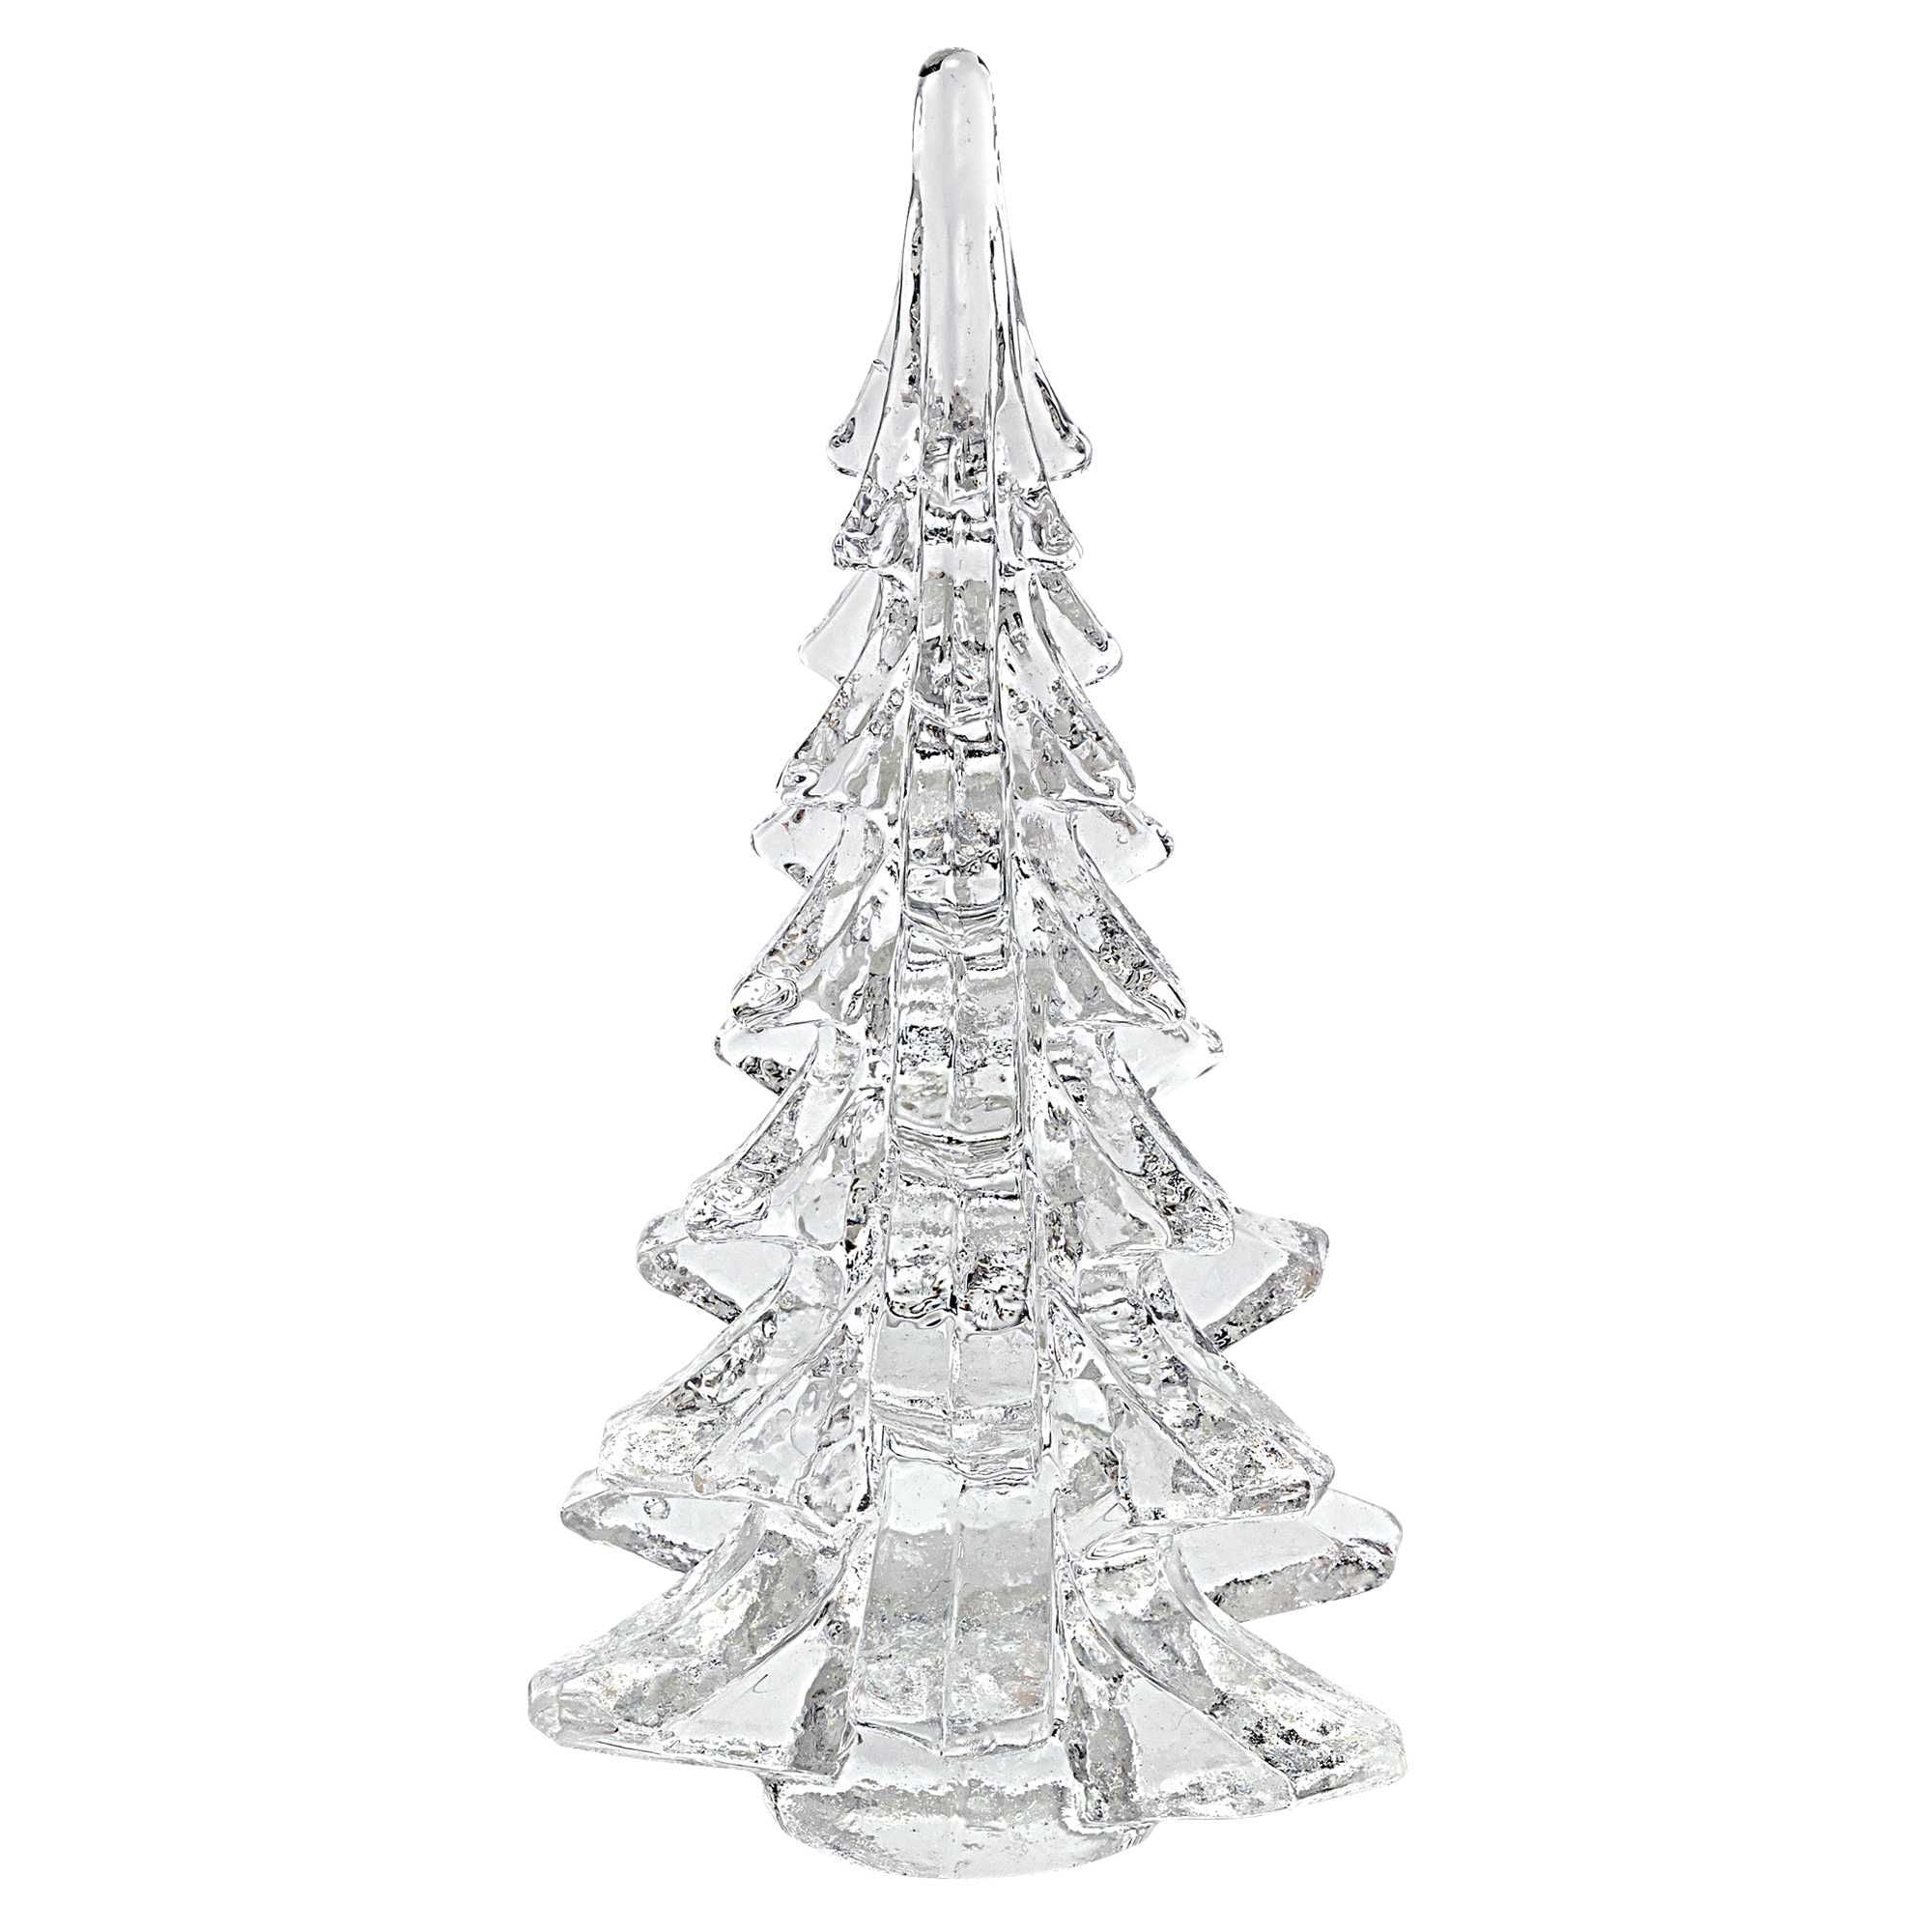 10"H Mouth Blown Glass Christmas Tree Sculpture - Clear